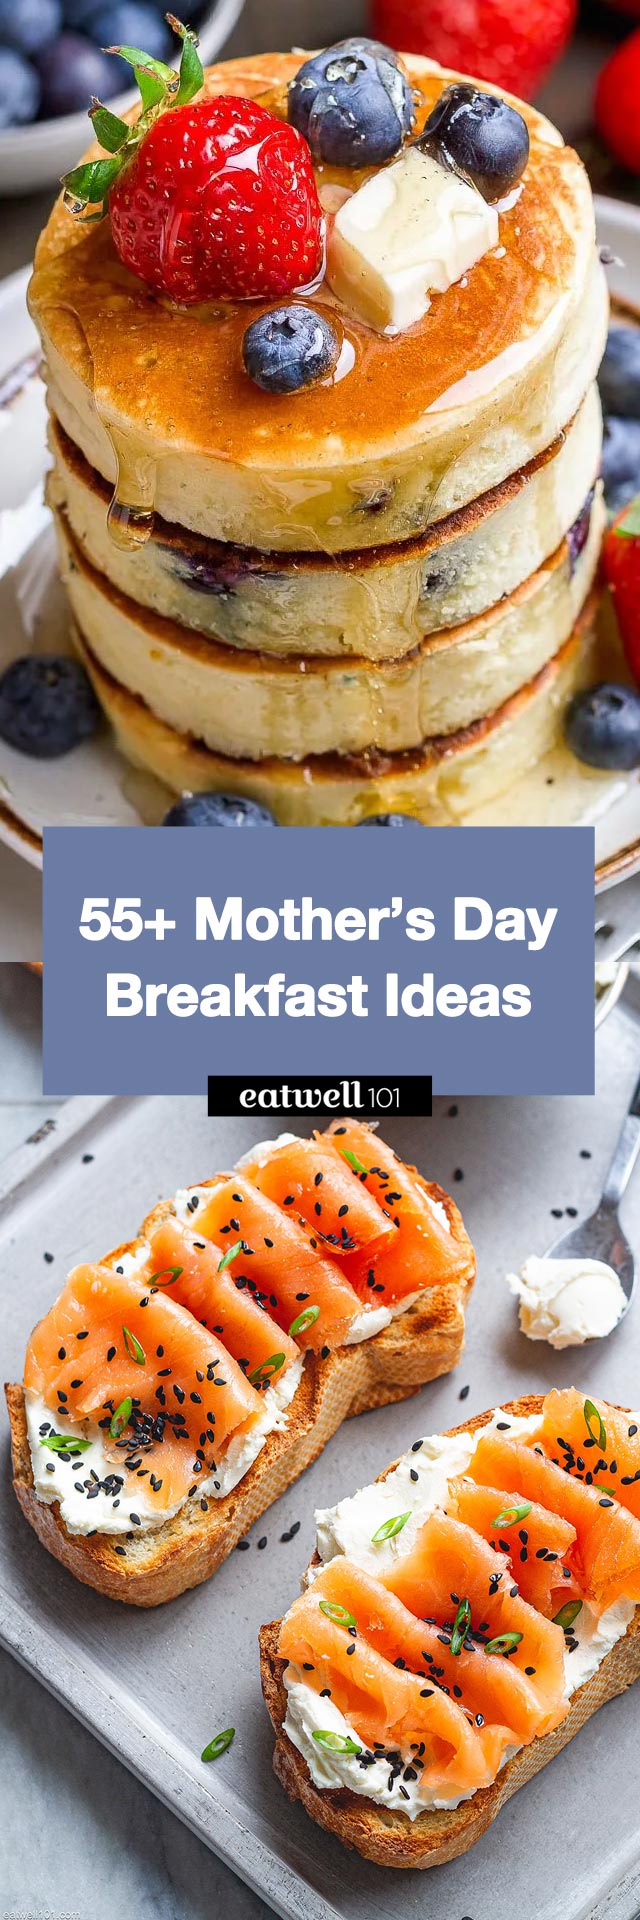 55+ Easy Mother’s Day Breakfast Ideas - #mothersday #breakfast #recipes #eatwell101 - Looking for easy yet impressive breakfast recipes for Mother's Day? From Dutch baby pancakes and raspberry mimosas to smoked salmon toasts and iced mocha coffee, you'll treat your mother with these breakfast ideas for sure!